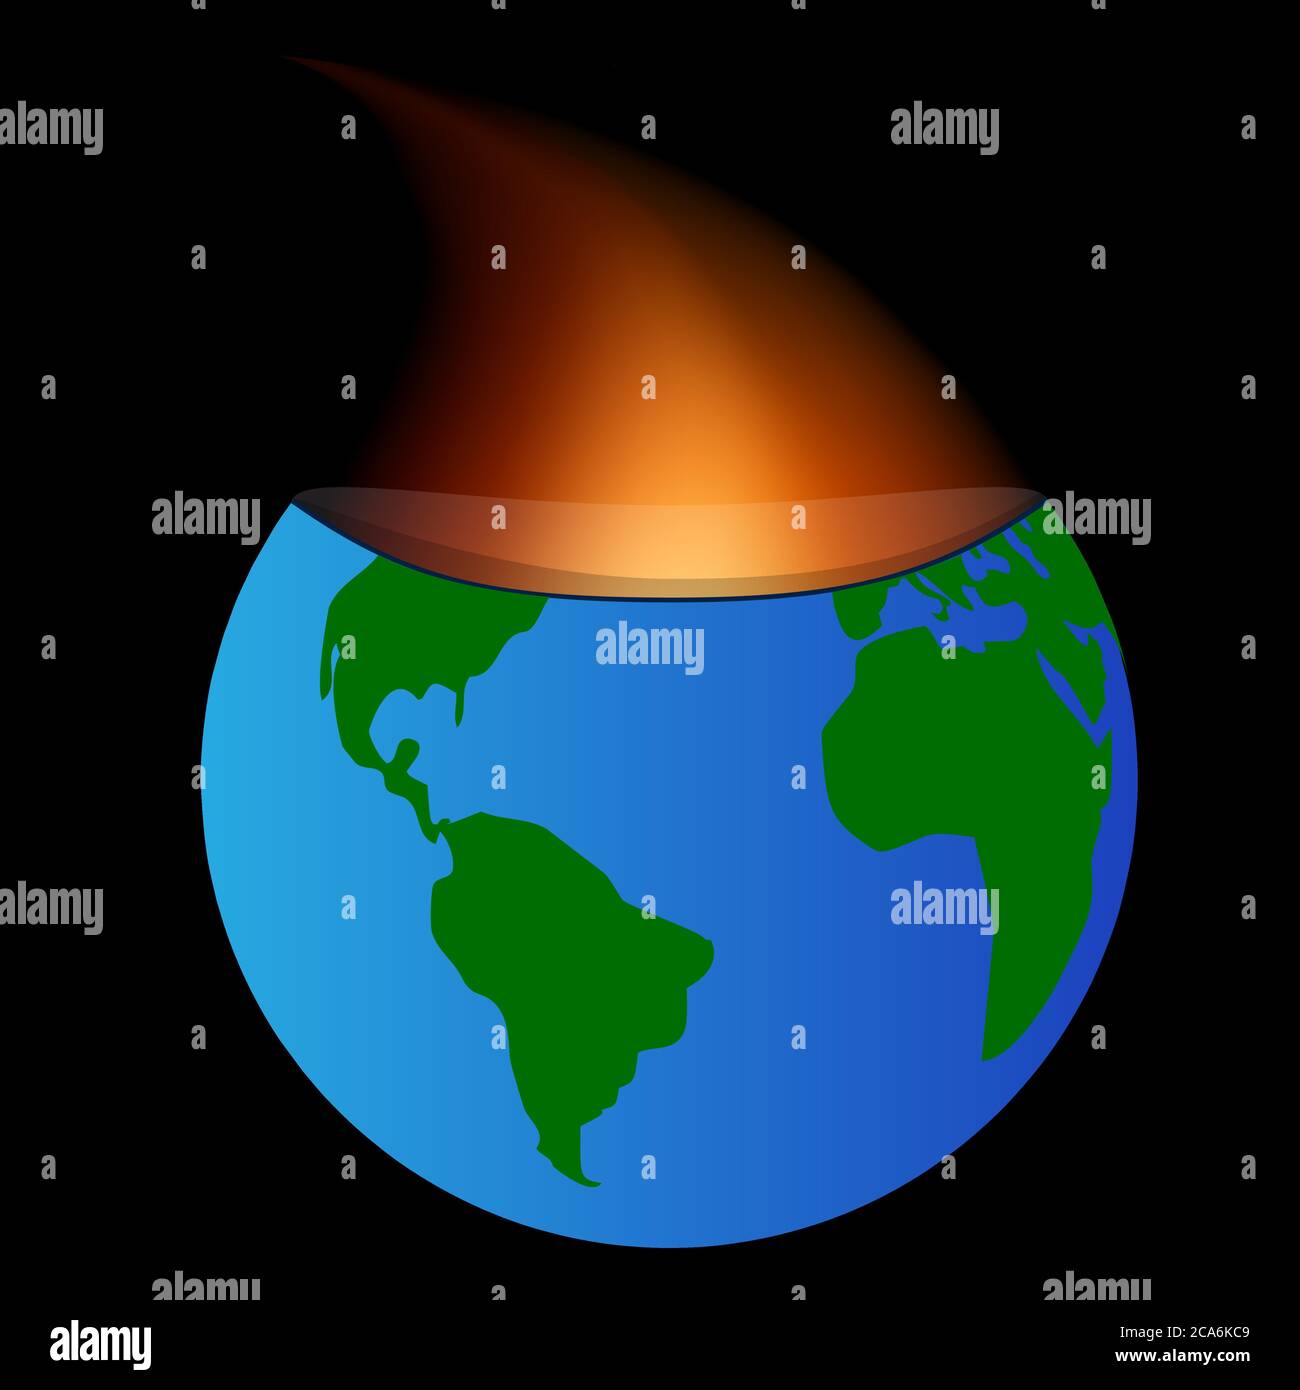 Fire coming from within the core of the planet earth. Stock Vector